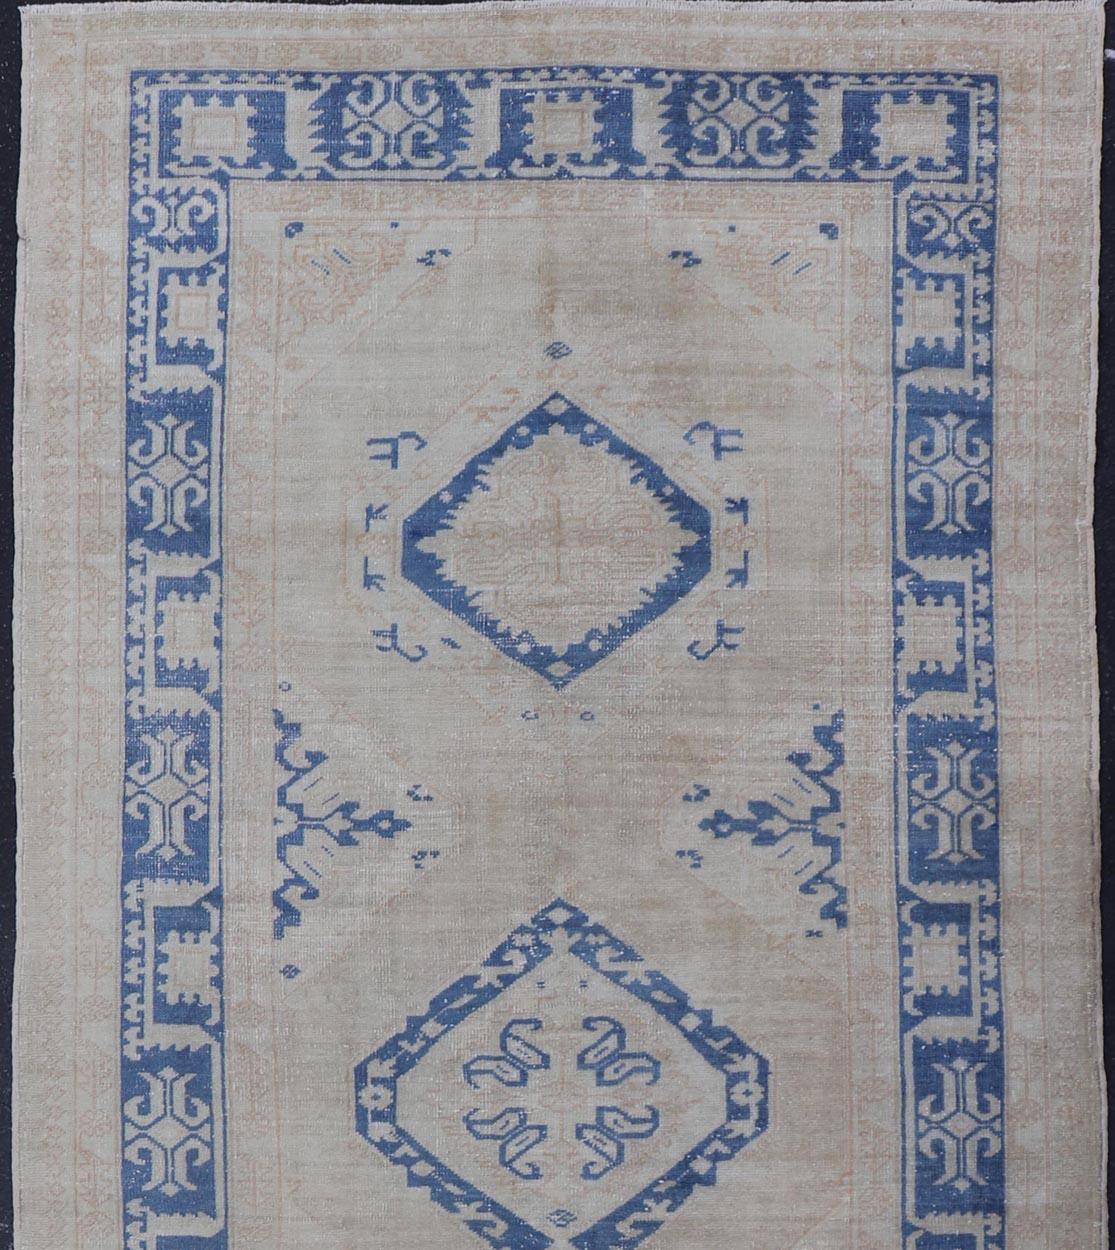 Measures: 5'0 x 13'0 

This beautiful vintage Oushak was hand-knotted in Turkey during the 1940's. The border features stylized motifs, complimentary to the detailing within the central medallions. The field is rendered in a rich blue medallions